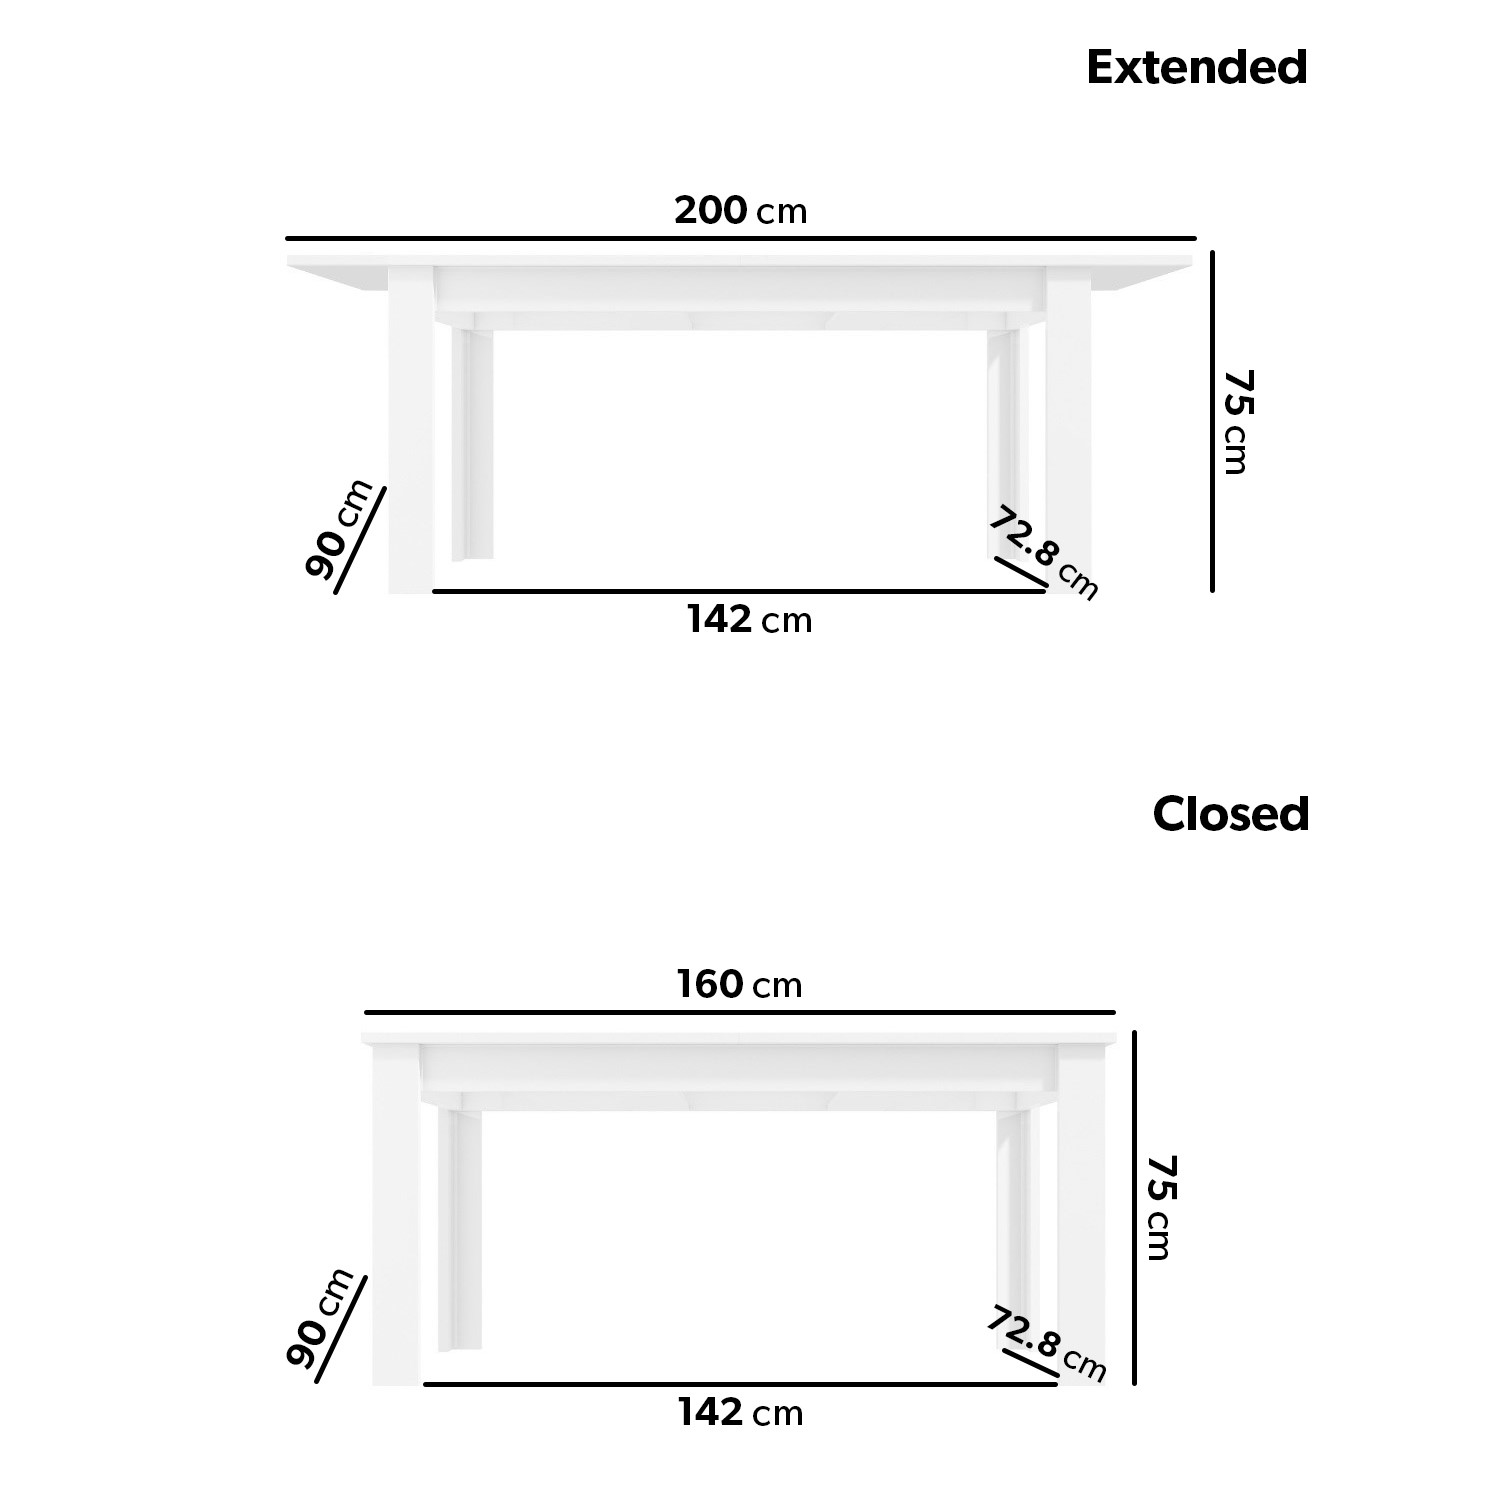 Read more about White gloss extendable dining table seats 4-6 vivienne